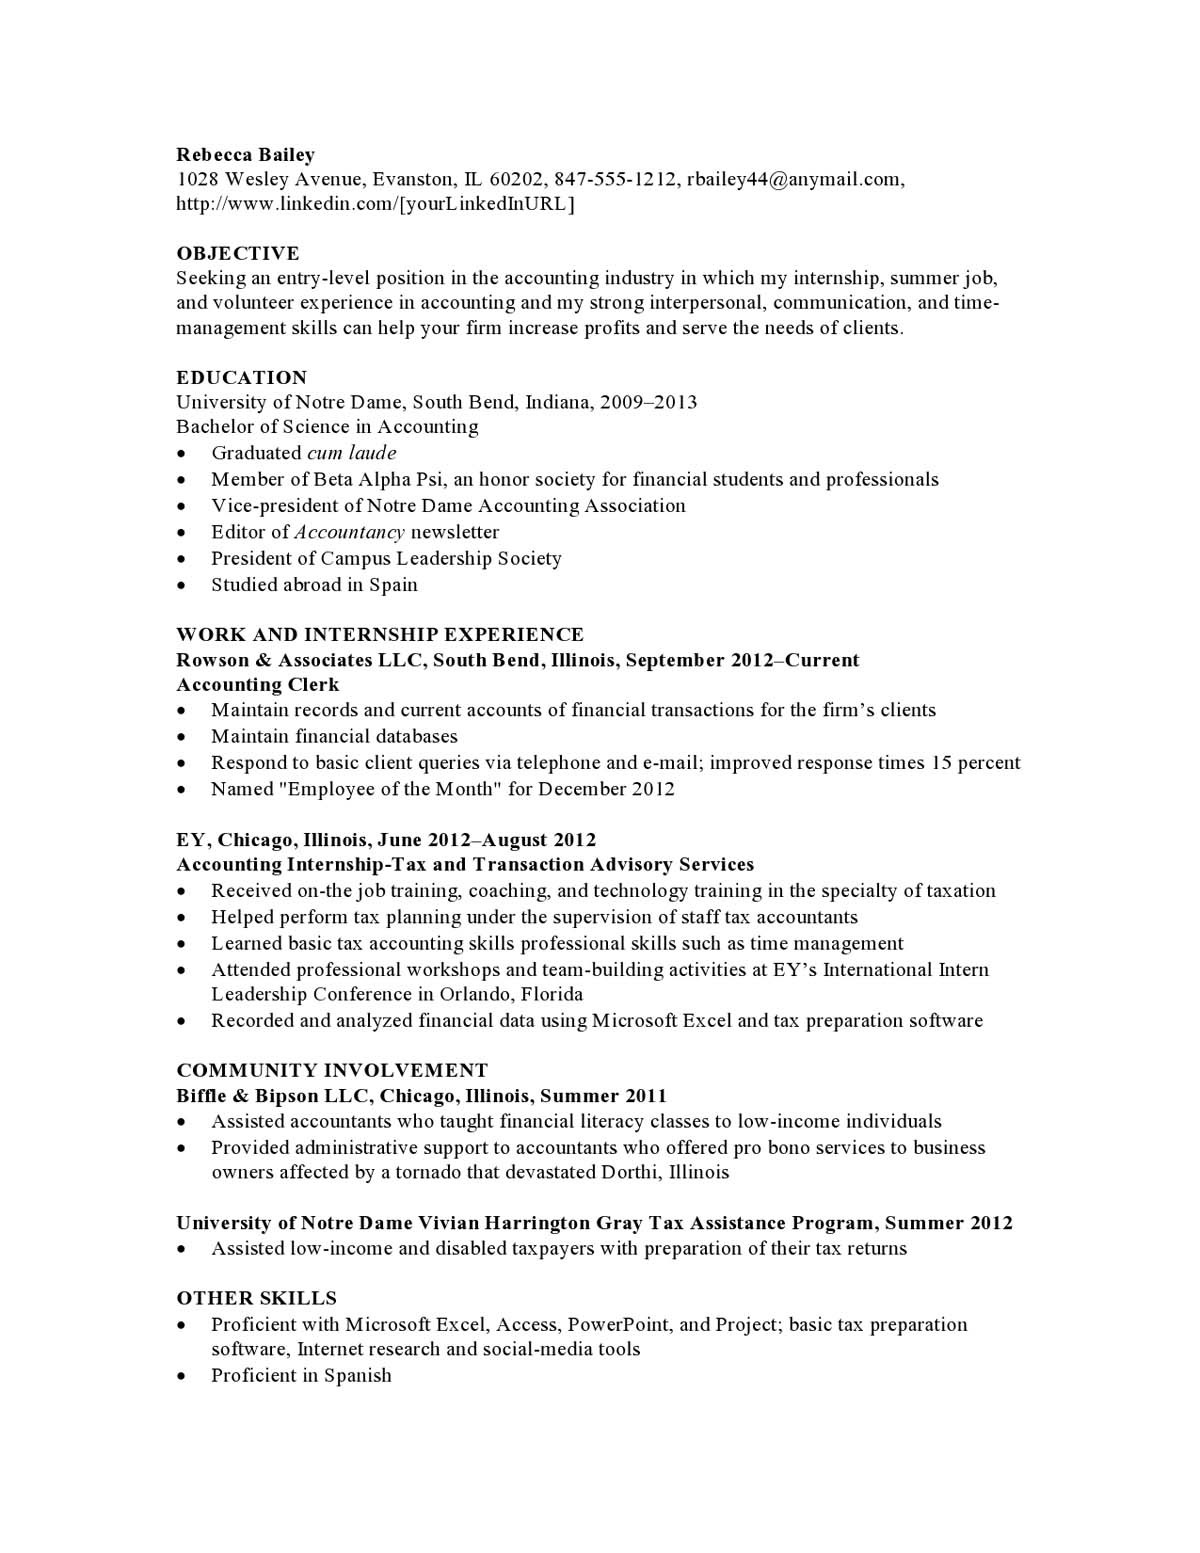 Entry Level Accounting Jobs Resume Sample Resume Samples Templates Examples Vault.com